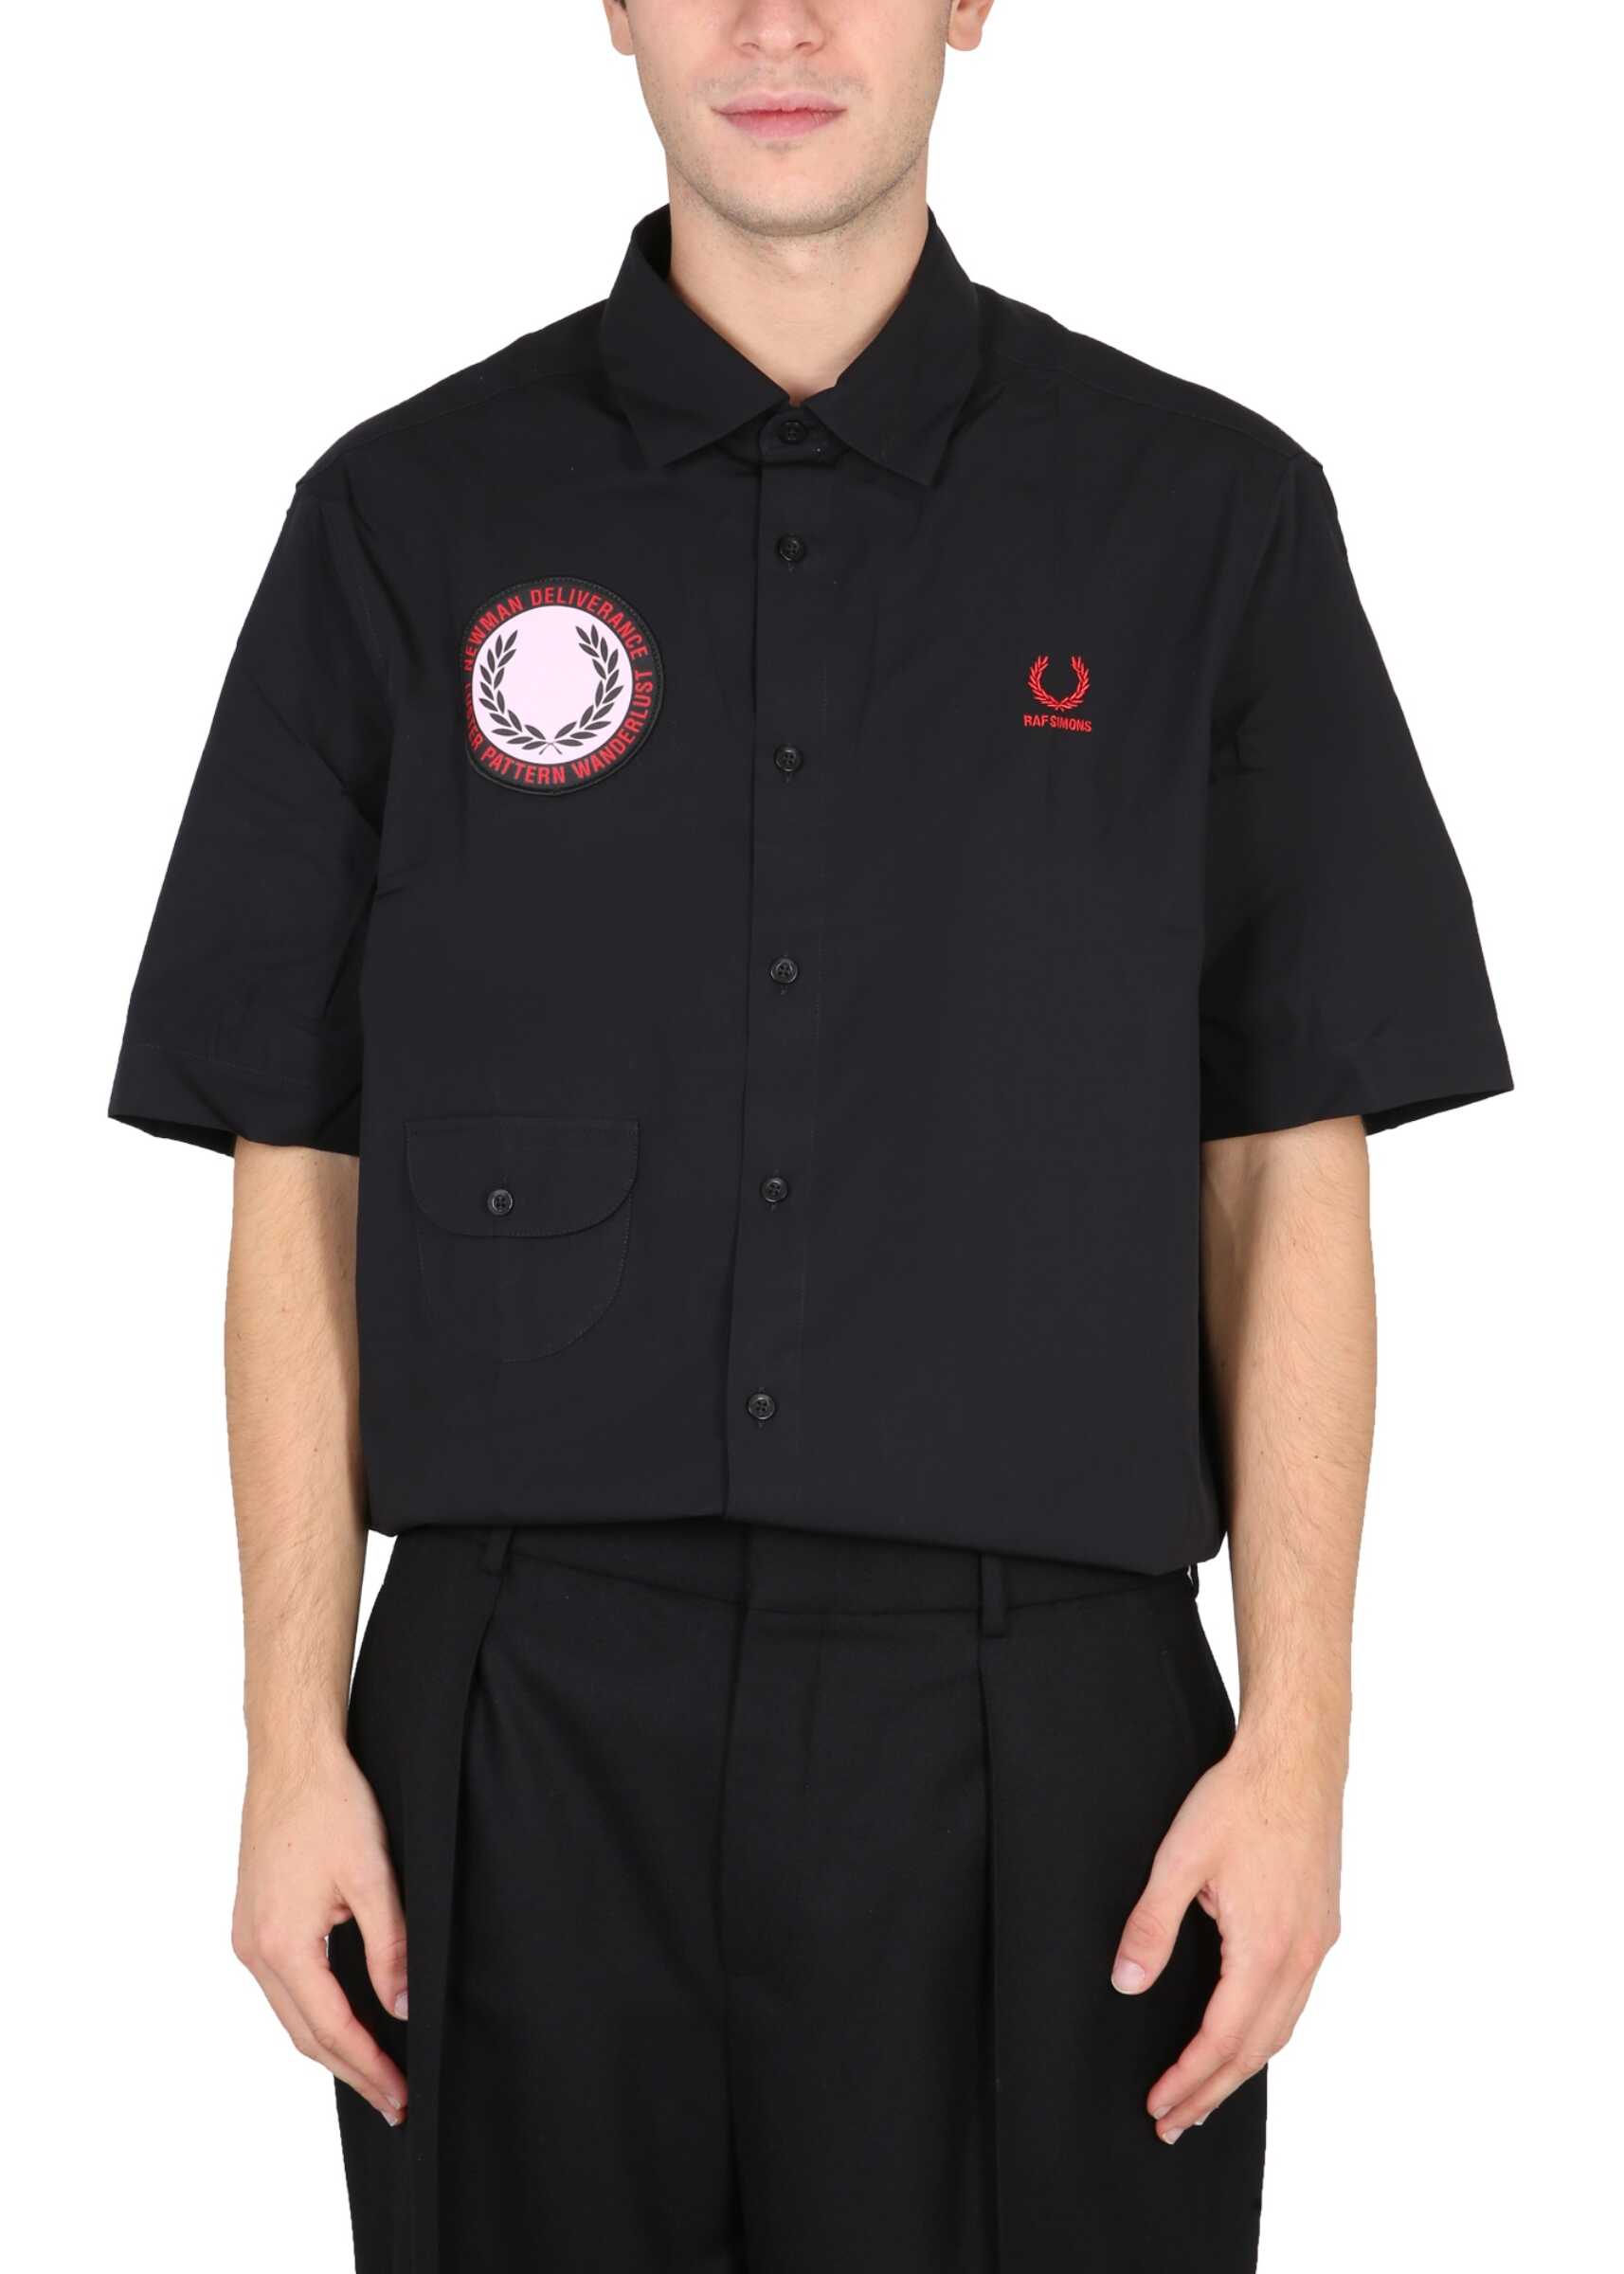 FRED PERRY X RAF SIMONS Shirt With Patch BLACK